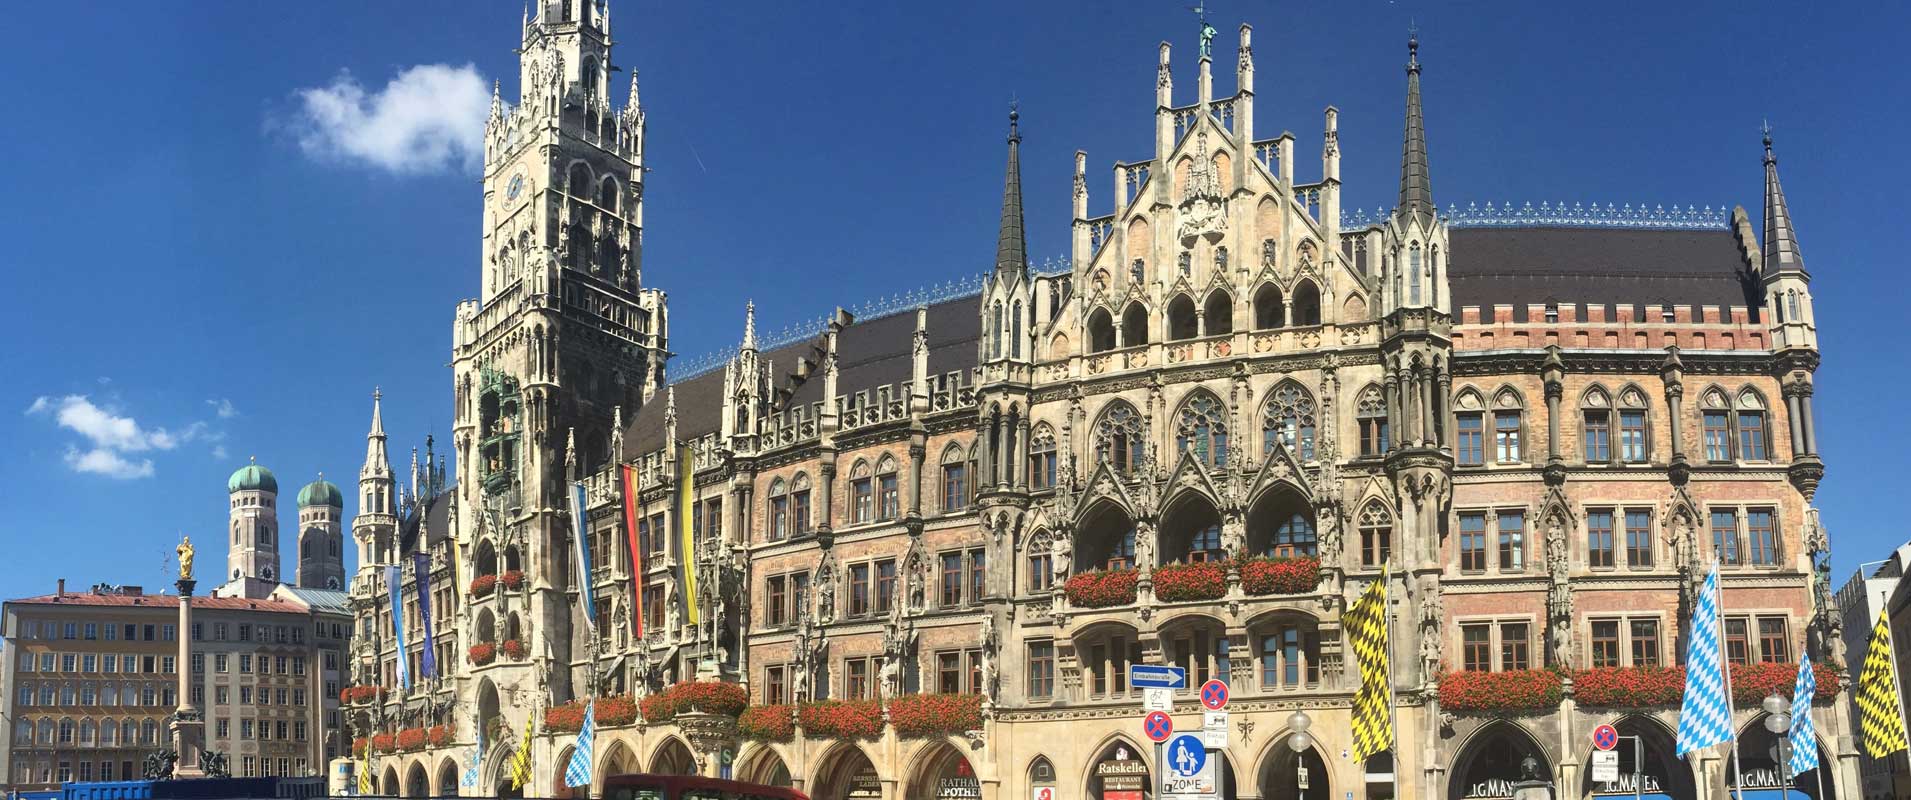 Walking Tour of Munich with Old City, English Garden, World War II, and ...